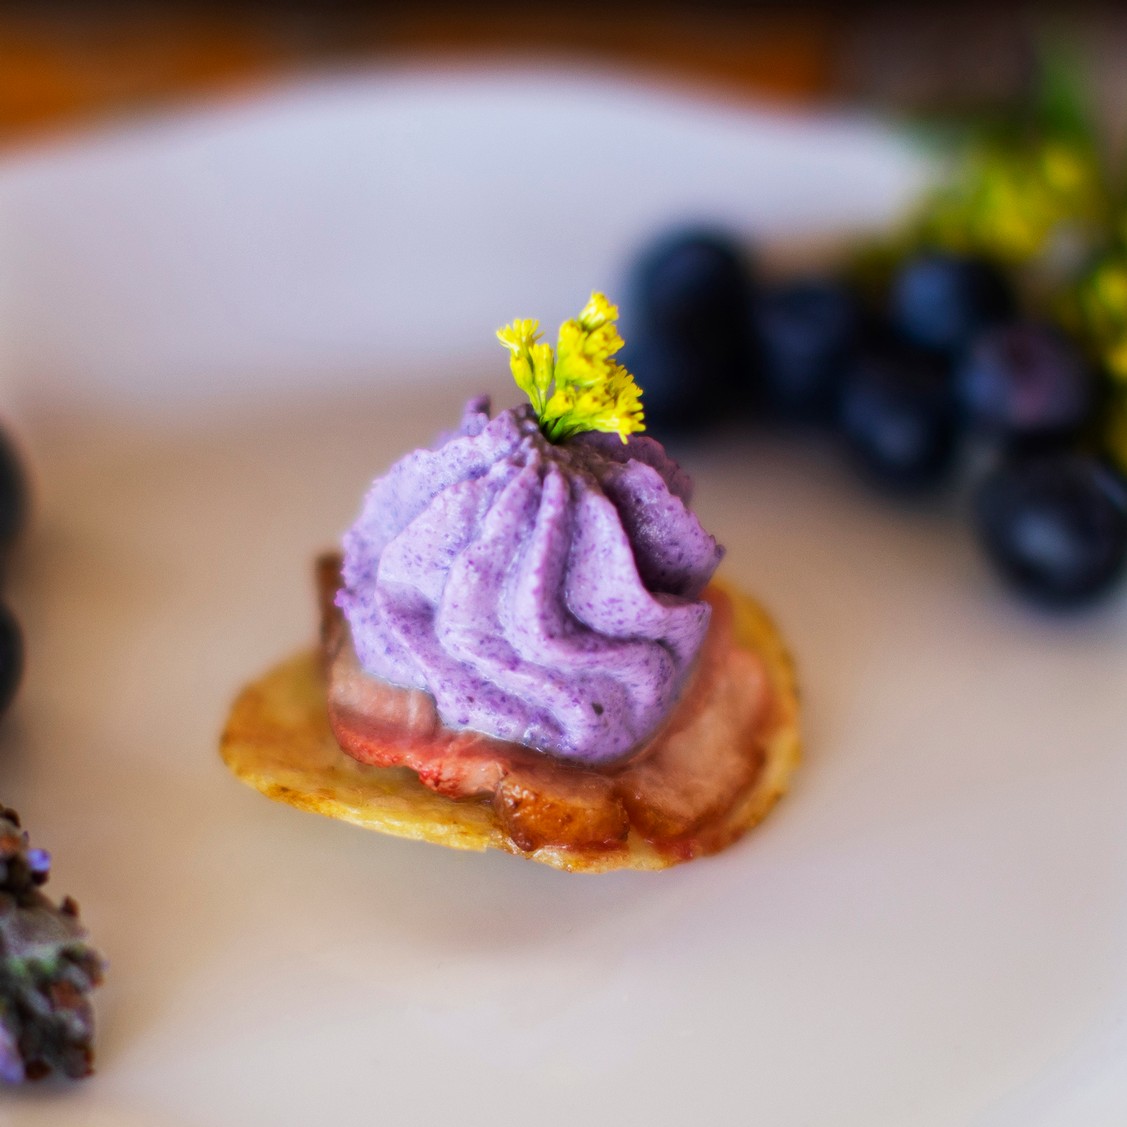 Seared Duck Breast on House-Made Potato Chip with Purple Cauliflower & Lavender Puree